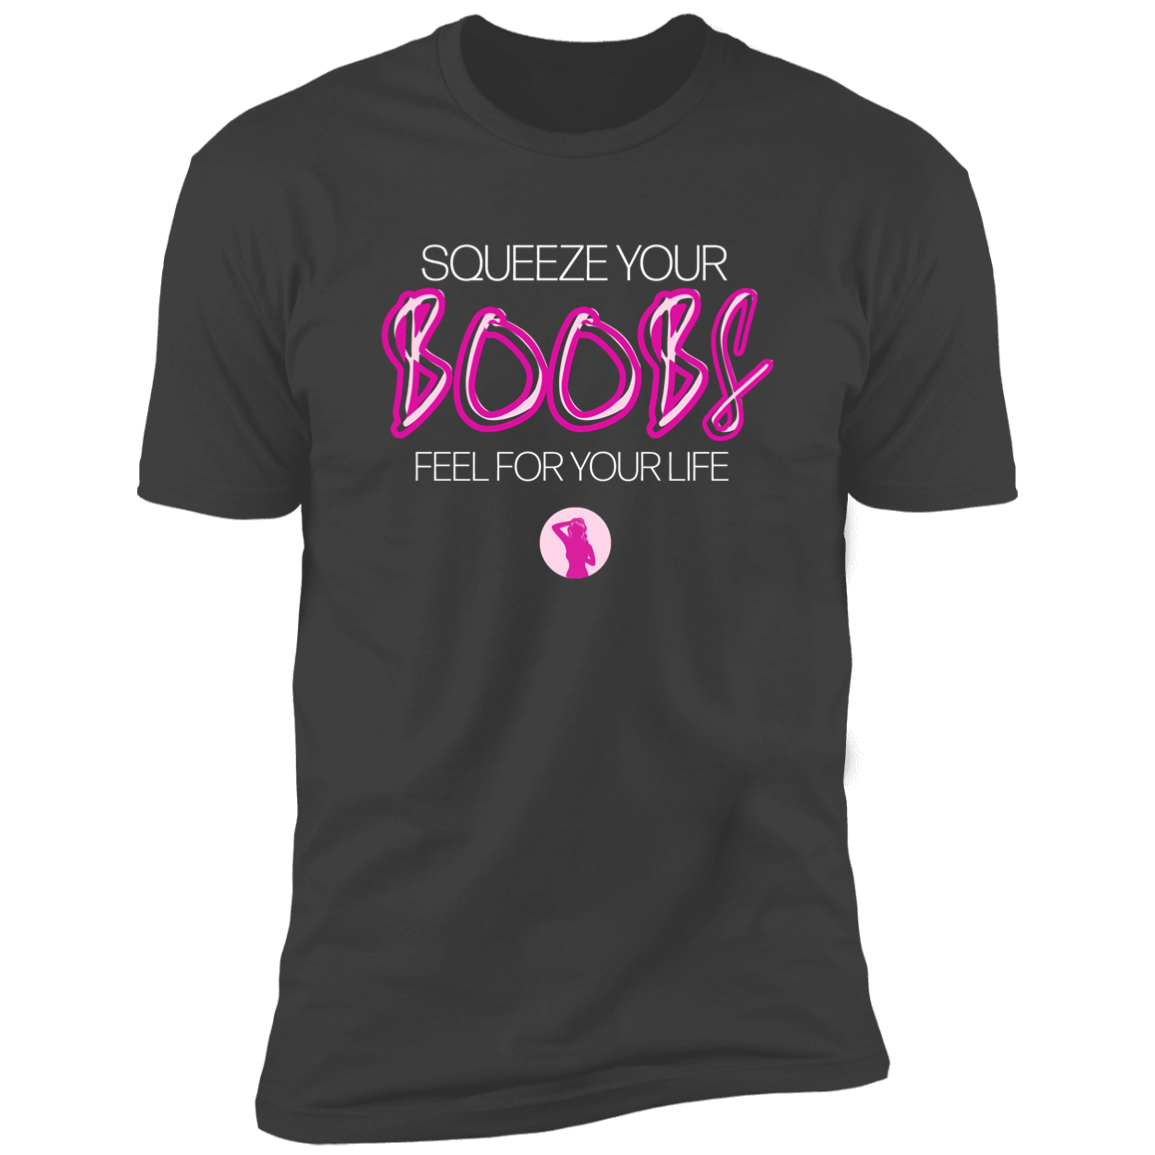 Squeeze Your Boobs Unisex Tshirt Black